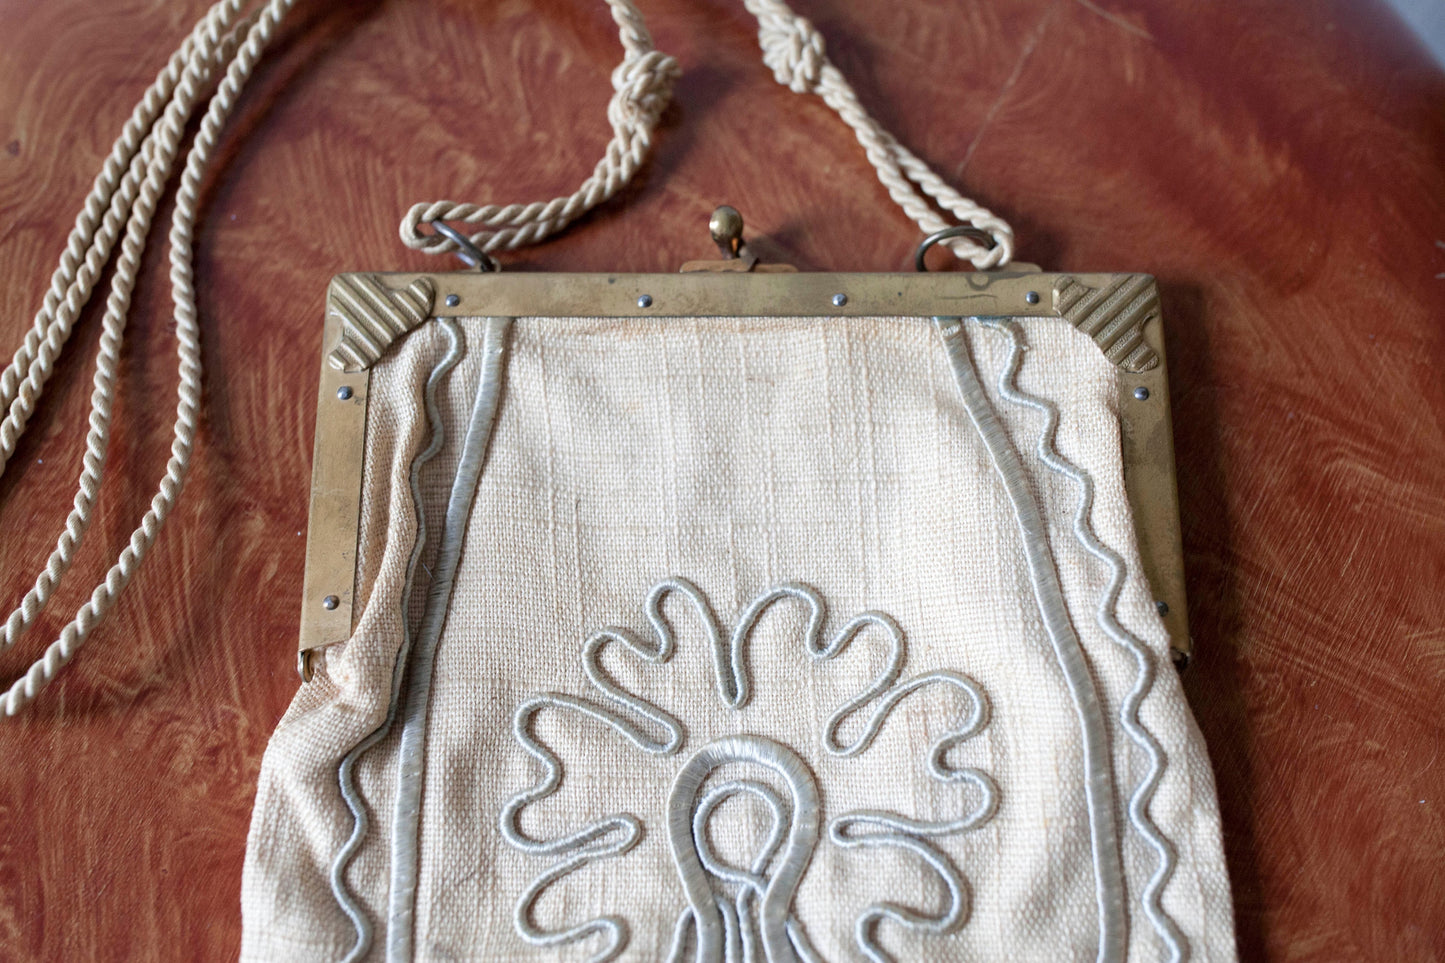 Vintage Beige Clasp Purse with Embroidery